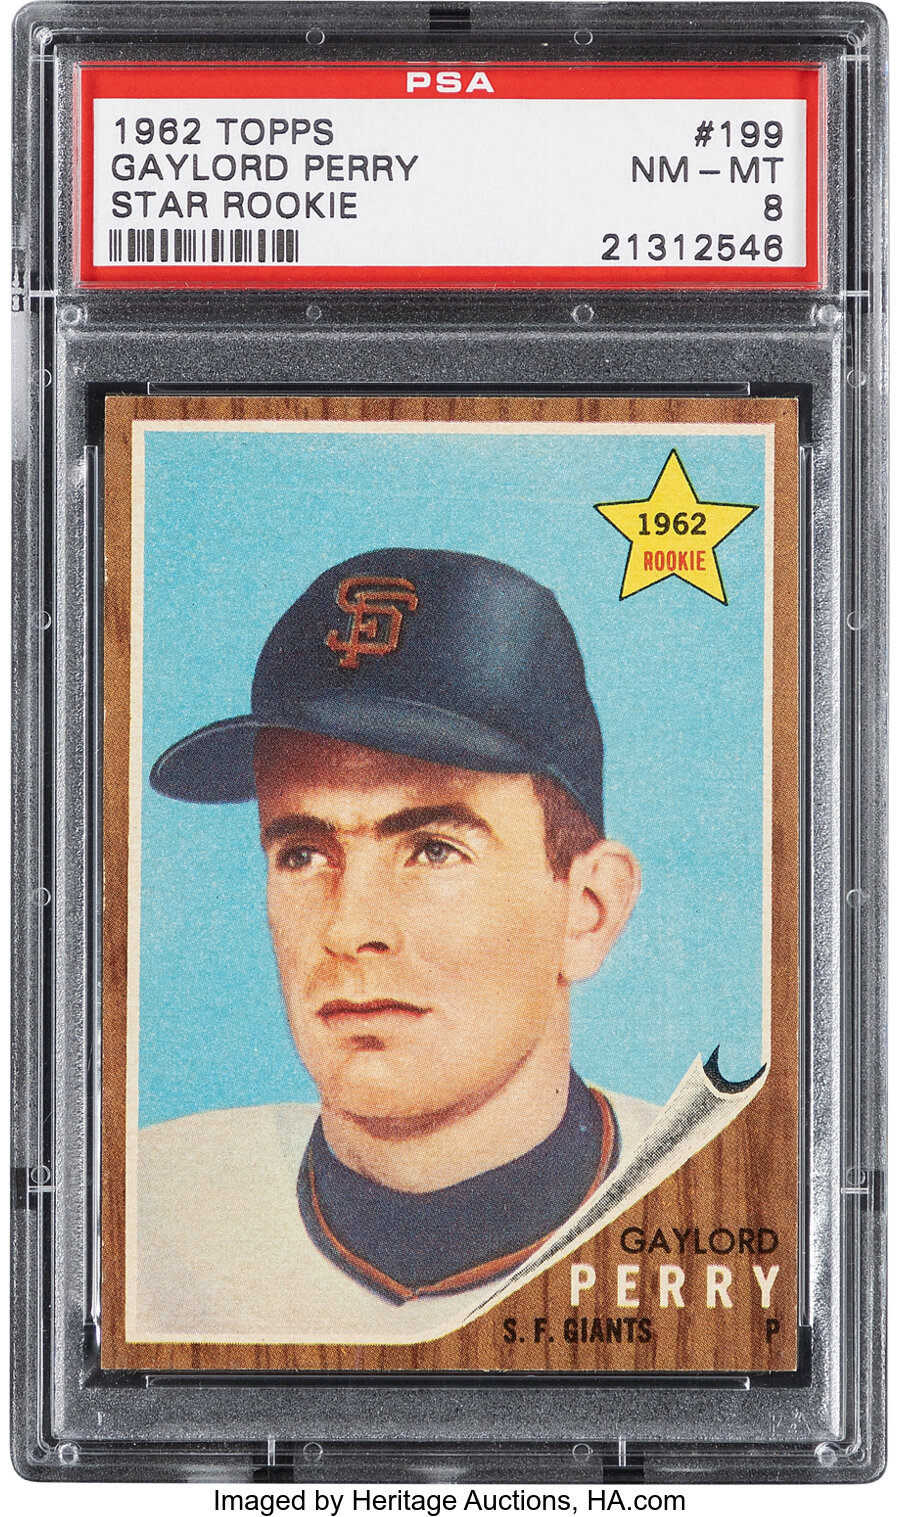 1962 Topps Gaylord Perry (Star Rookie) #199 PSA NM-MT 8